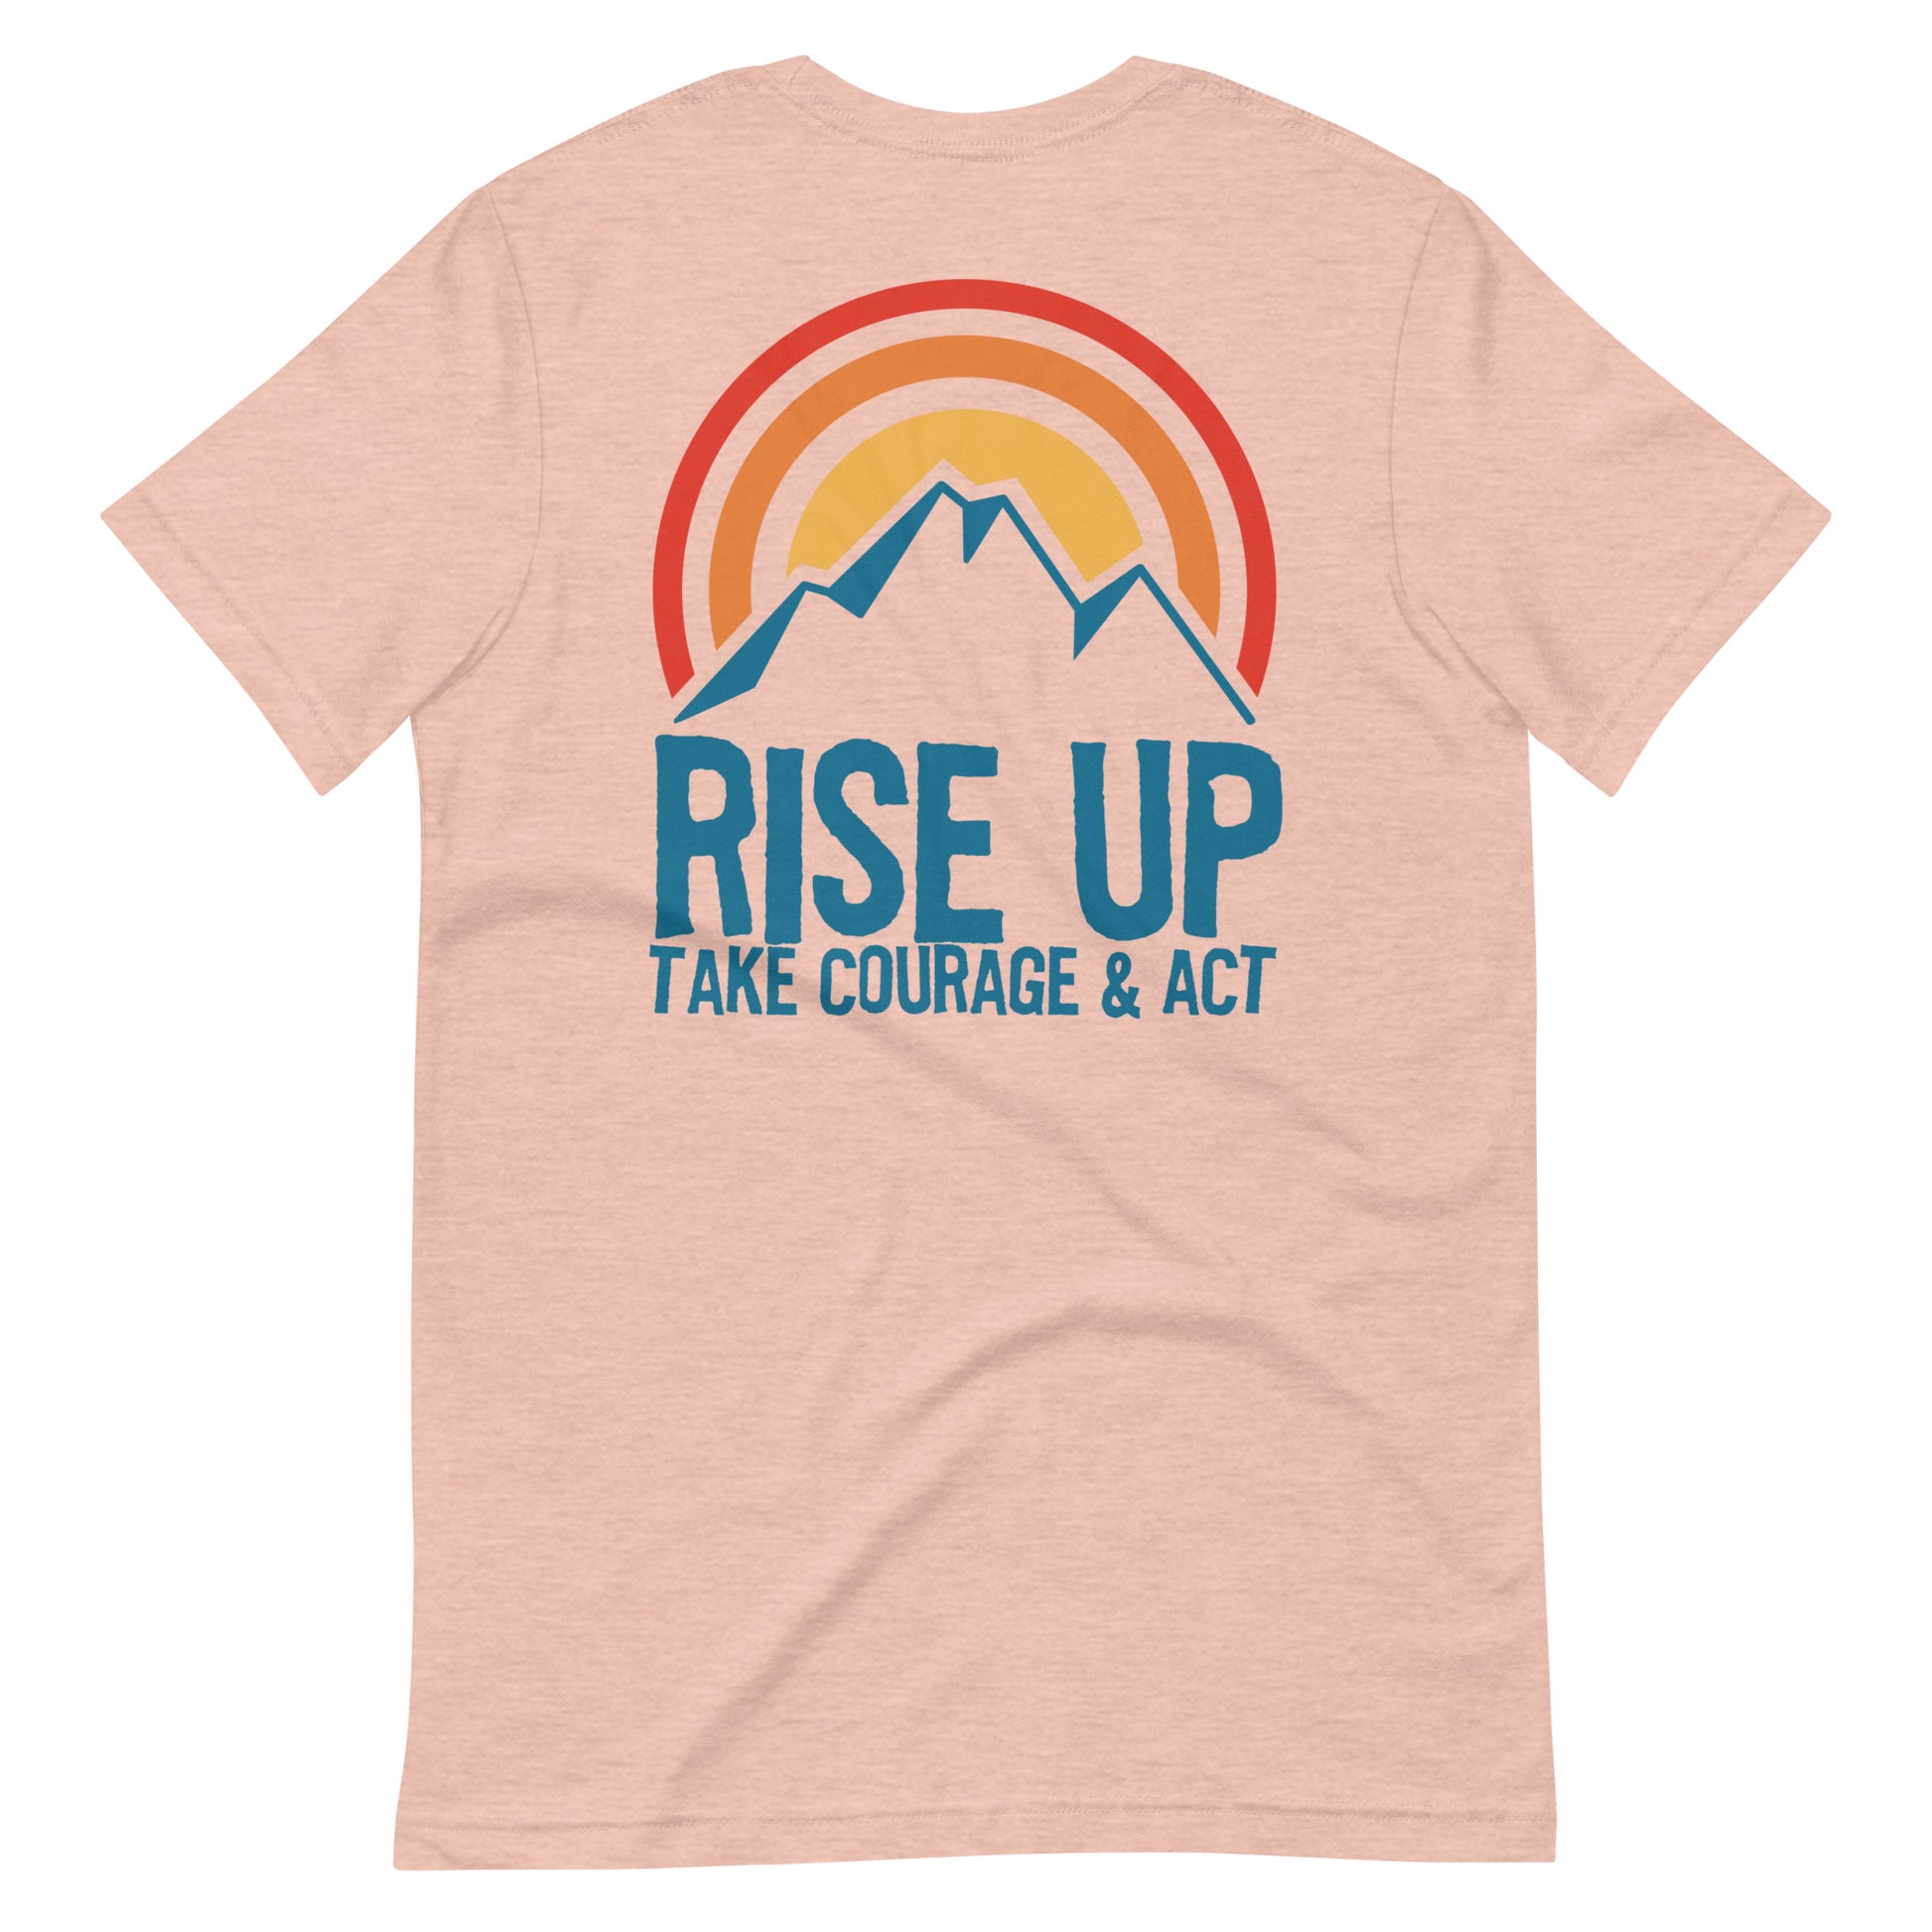 Rise Up! - For Your Courage